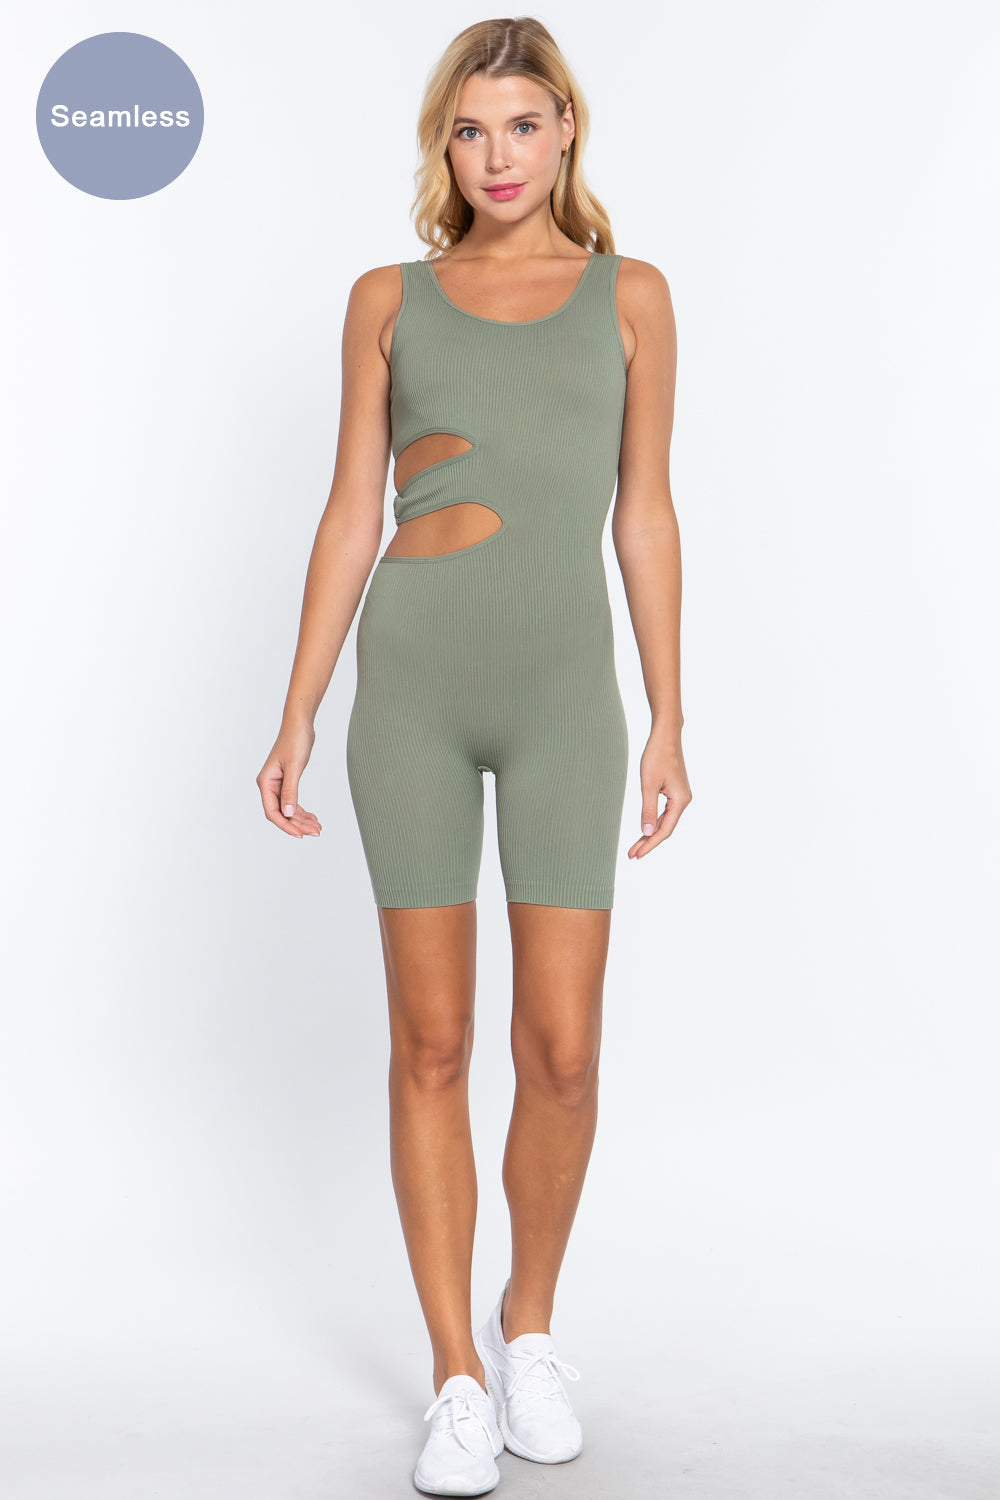 Tank tops Suave Cut-out Seamless Sage Green Romper Jumpsuits & Rompers jehouze 